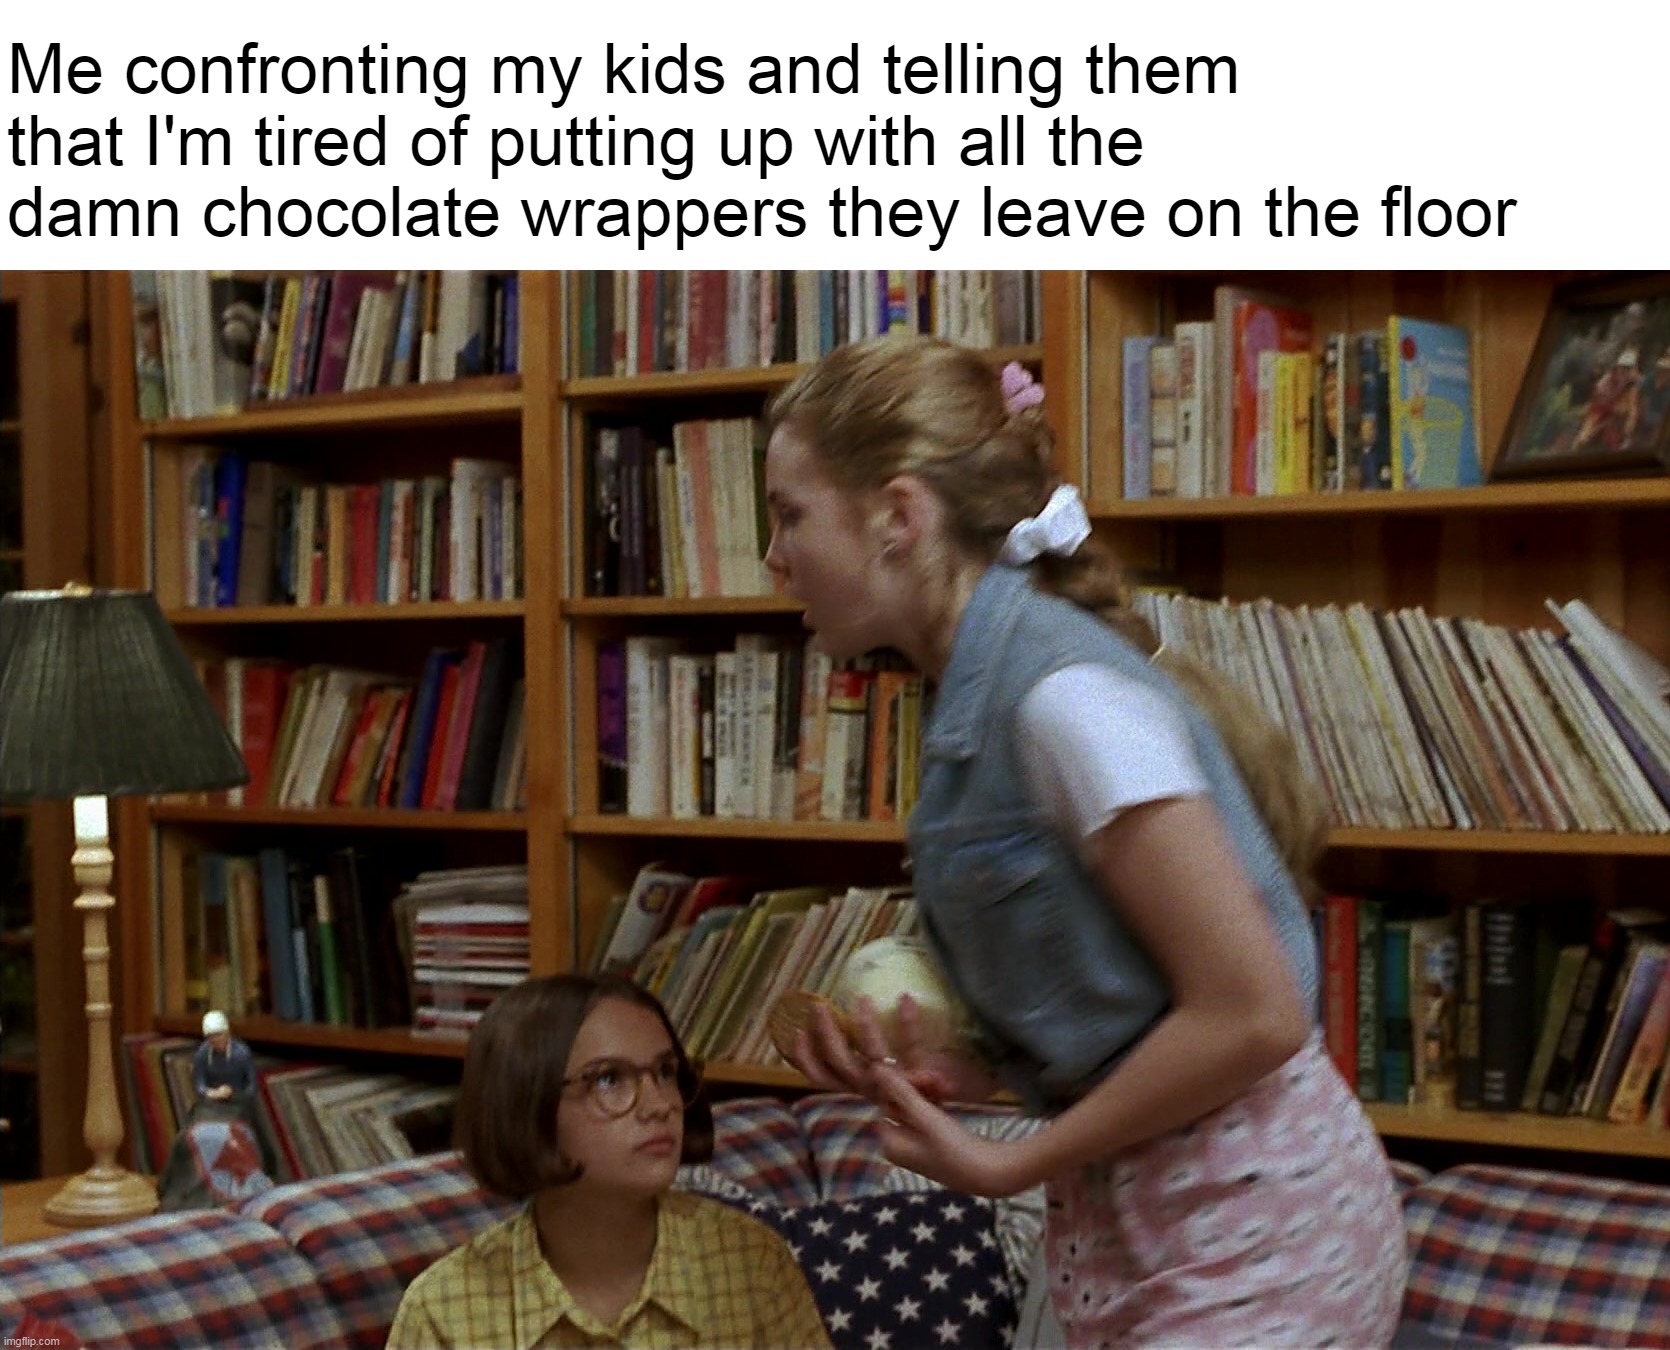 Me confronting my kids and telling them that I'm tired of putting up with all the damn chocolate wrappers they leave on the floor | image tagged in meme,memes,funny,humor,parents,children | made w/ Imgflip meme maker